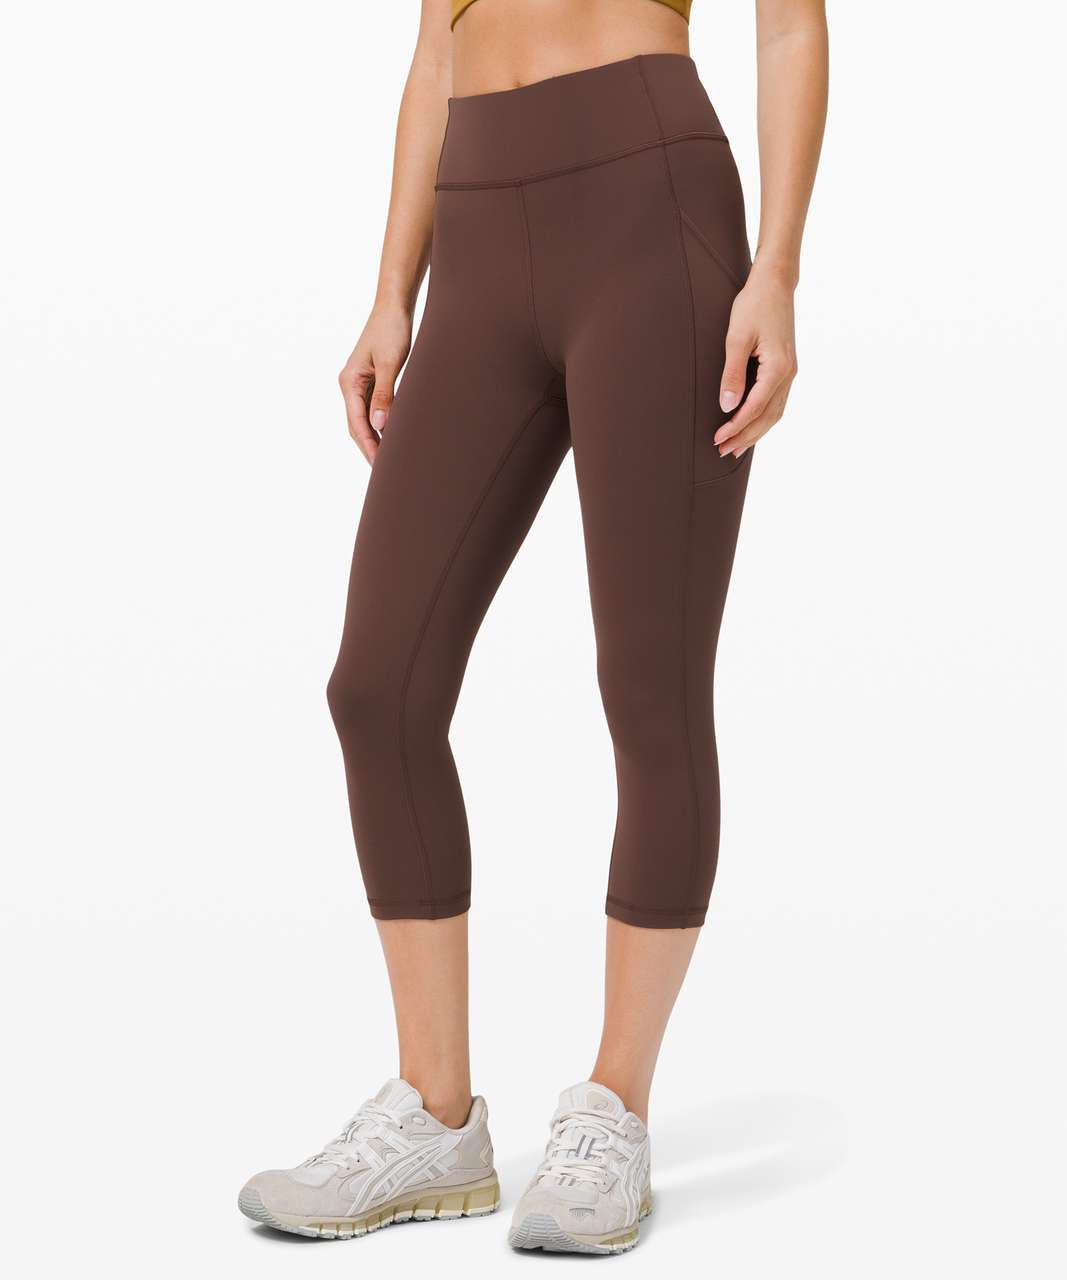 Chocolate Brown Lululemon Leggings Women's  International Society of  Precision Agriculture